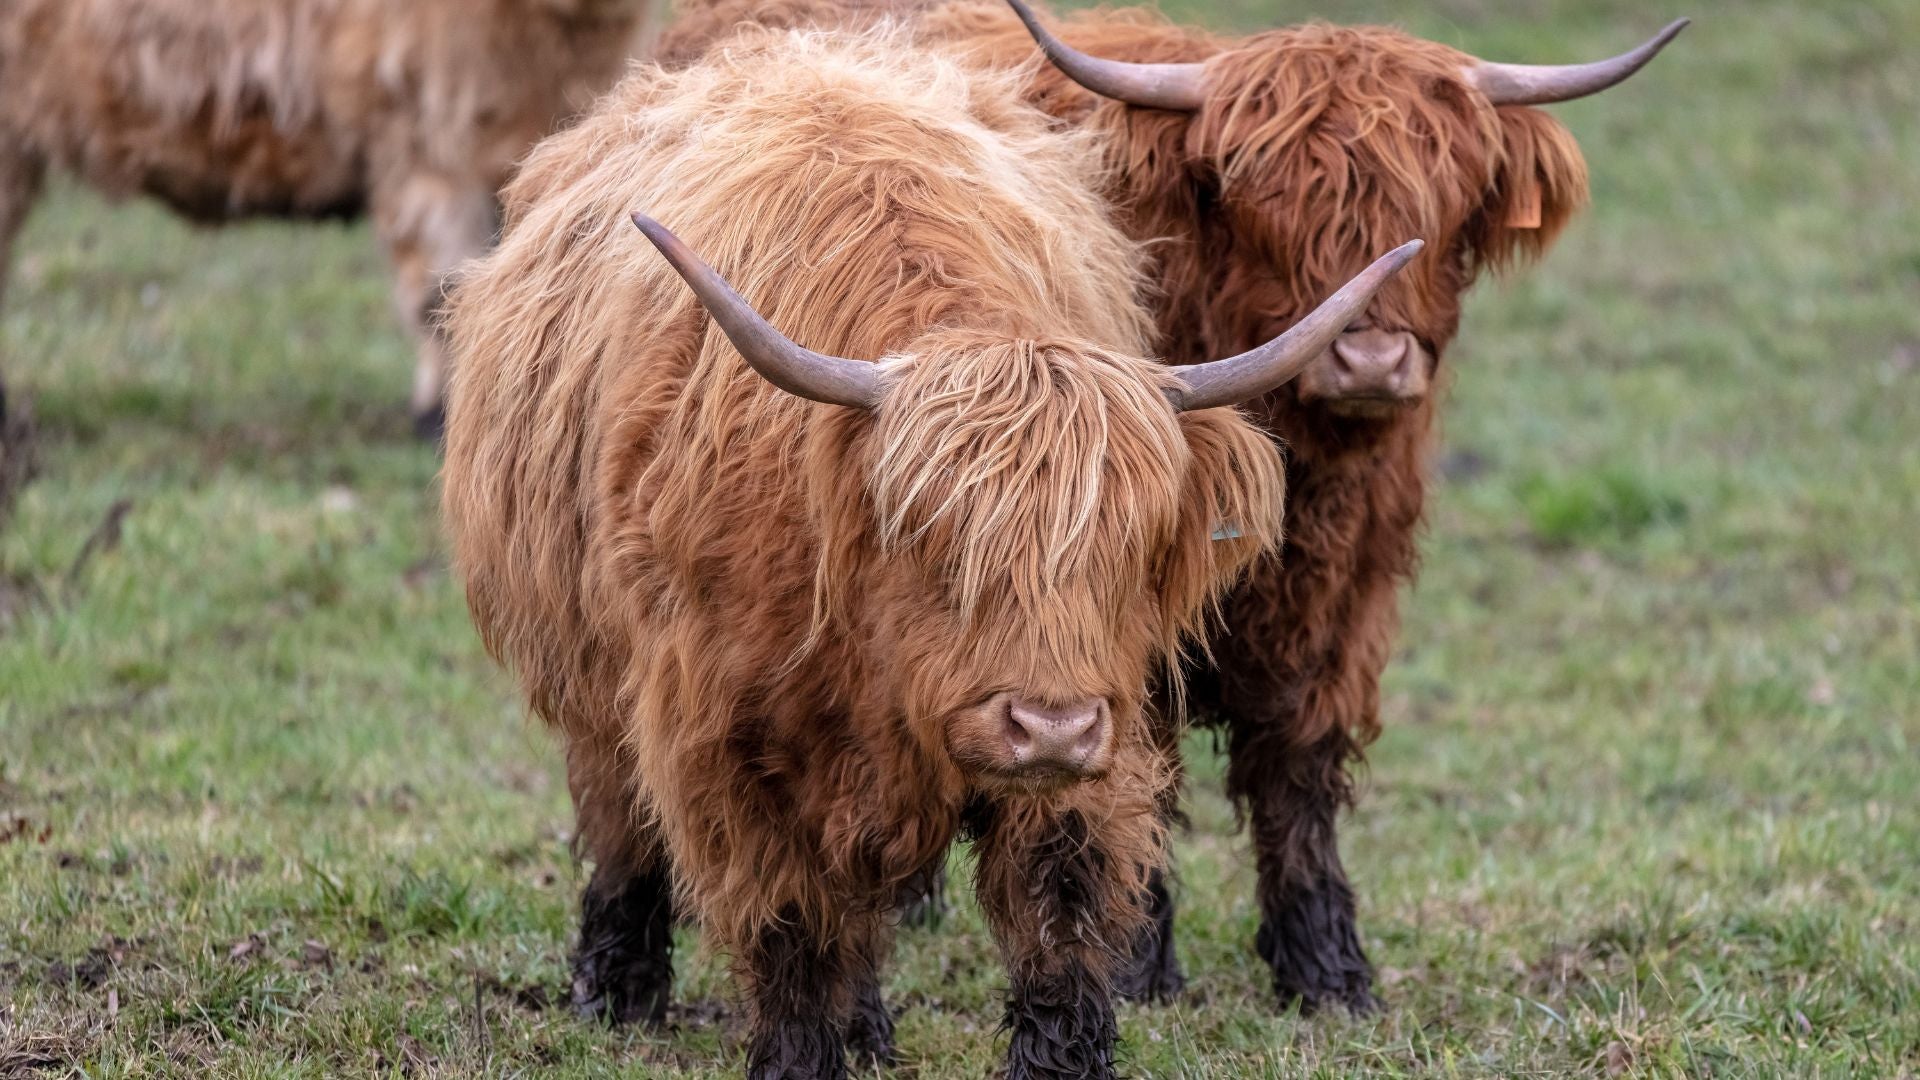 Long haired Cows